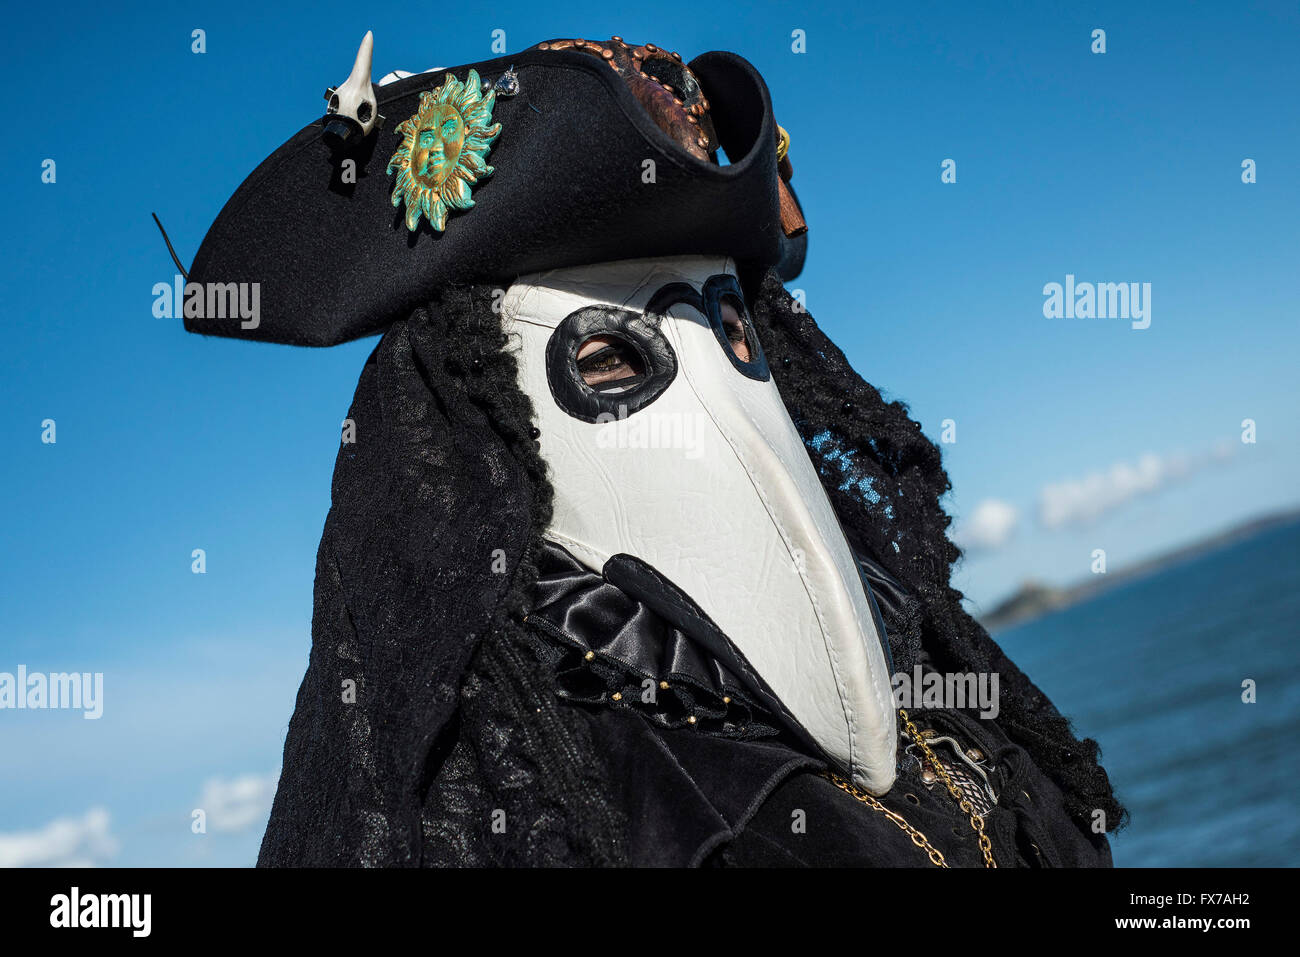 A masked guiser wears a tricorn hat. Stock Photo